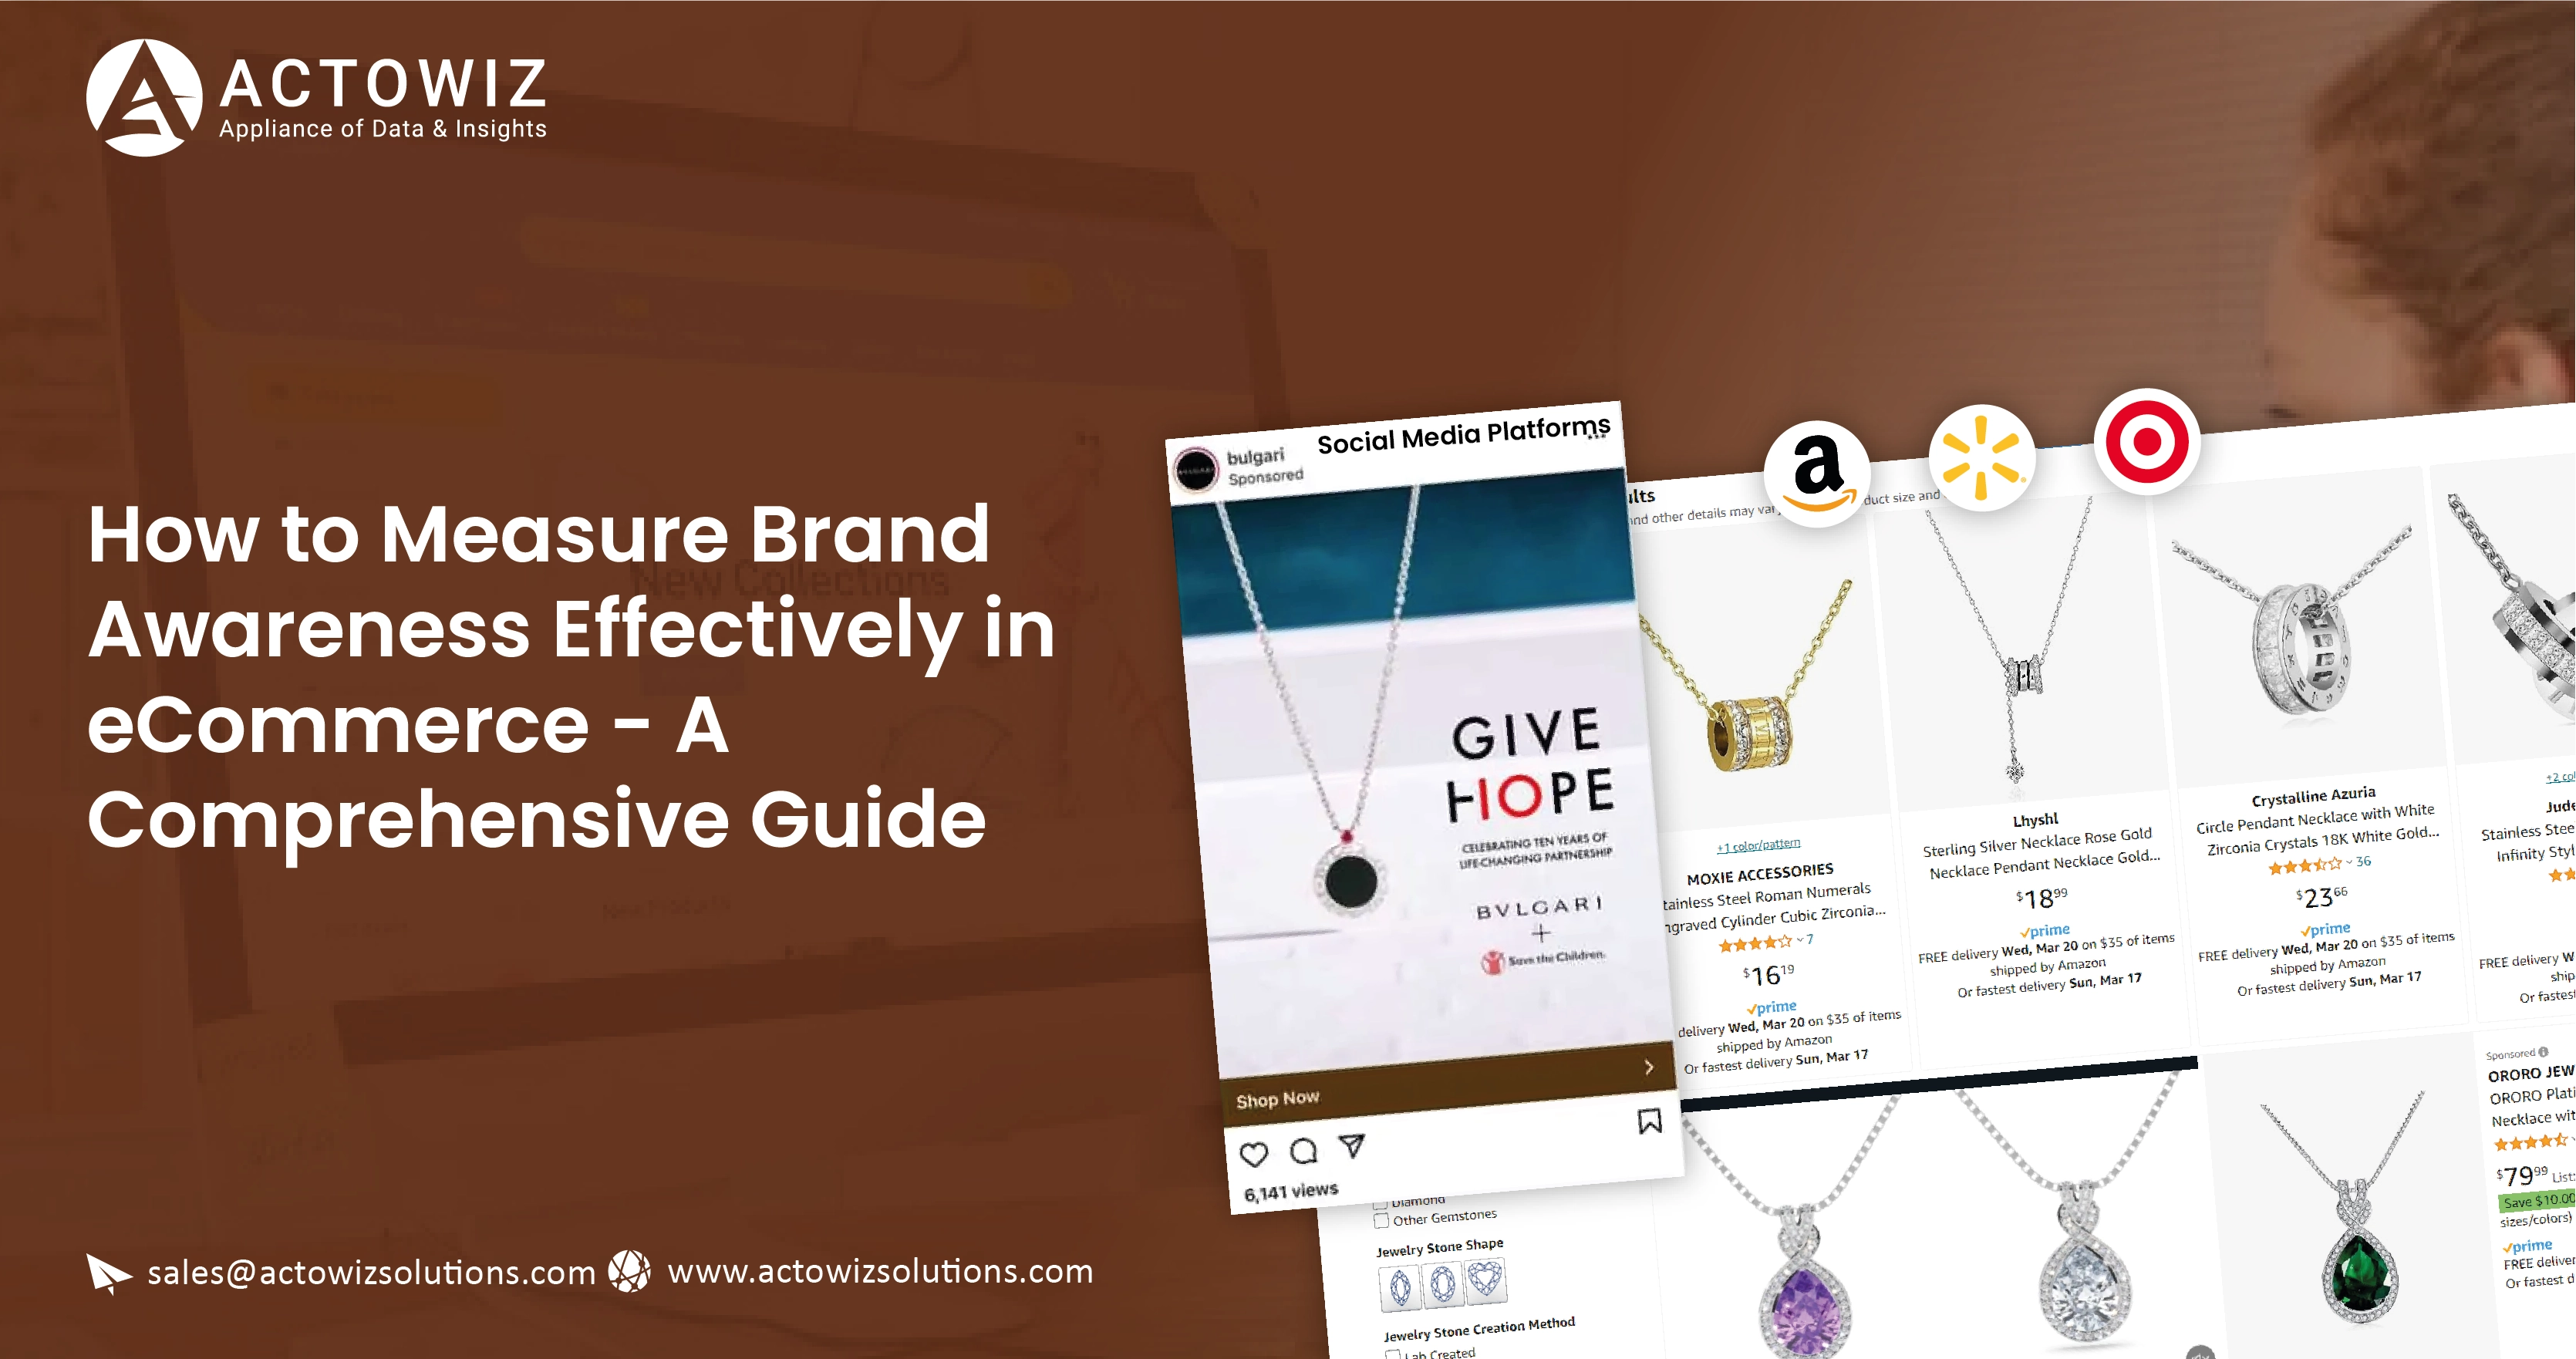 How-to-Measure-Brand-Awareness-Effectively-in-eCommerce-01